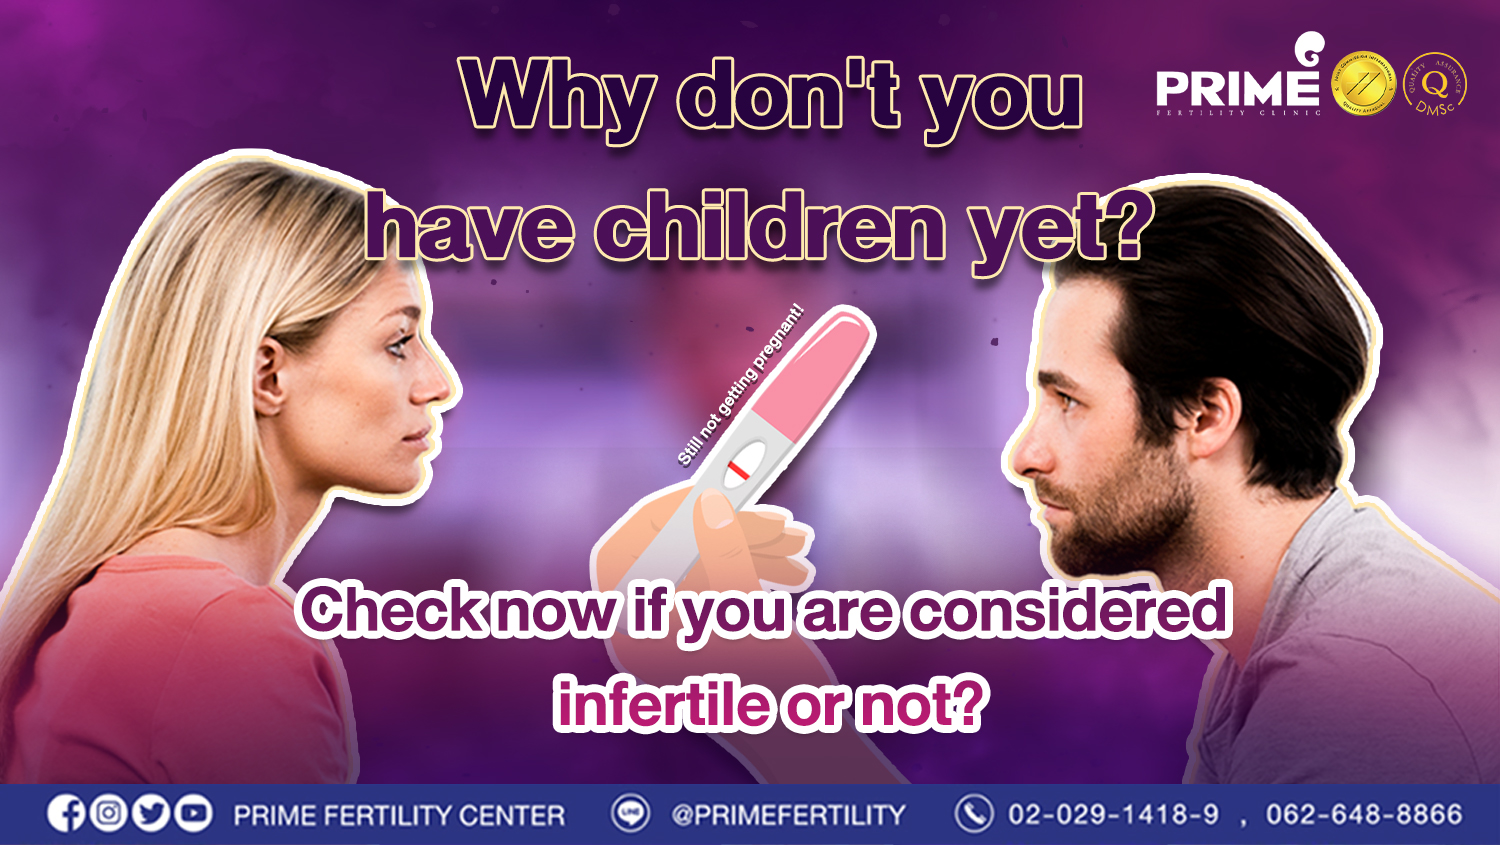 Why don't you have children yet? Check now if you are considered infertile or not.